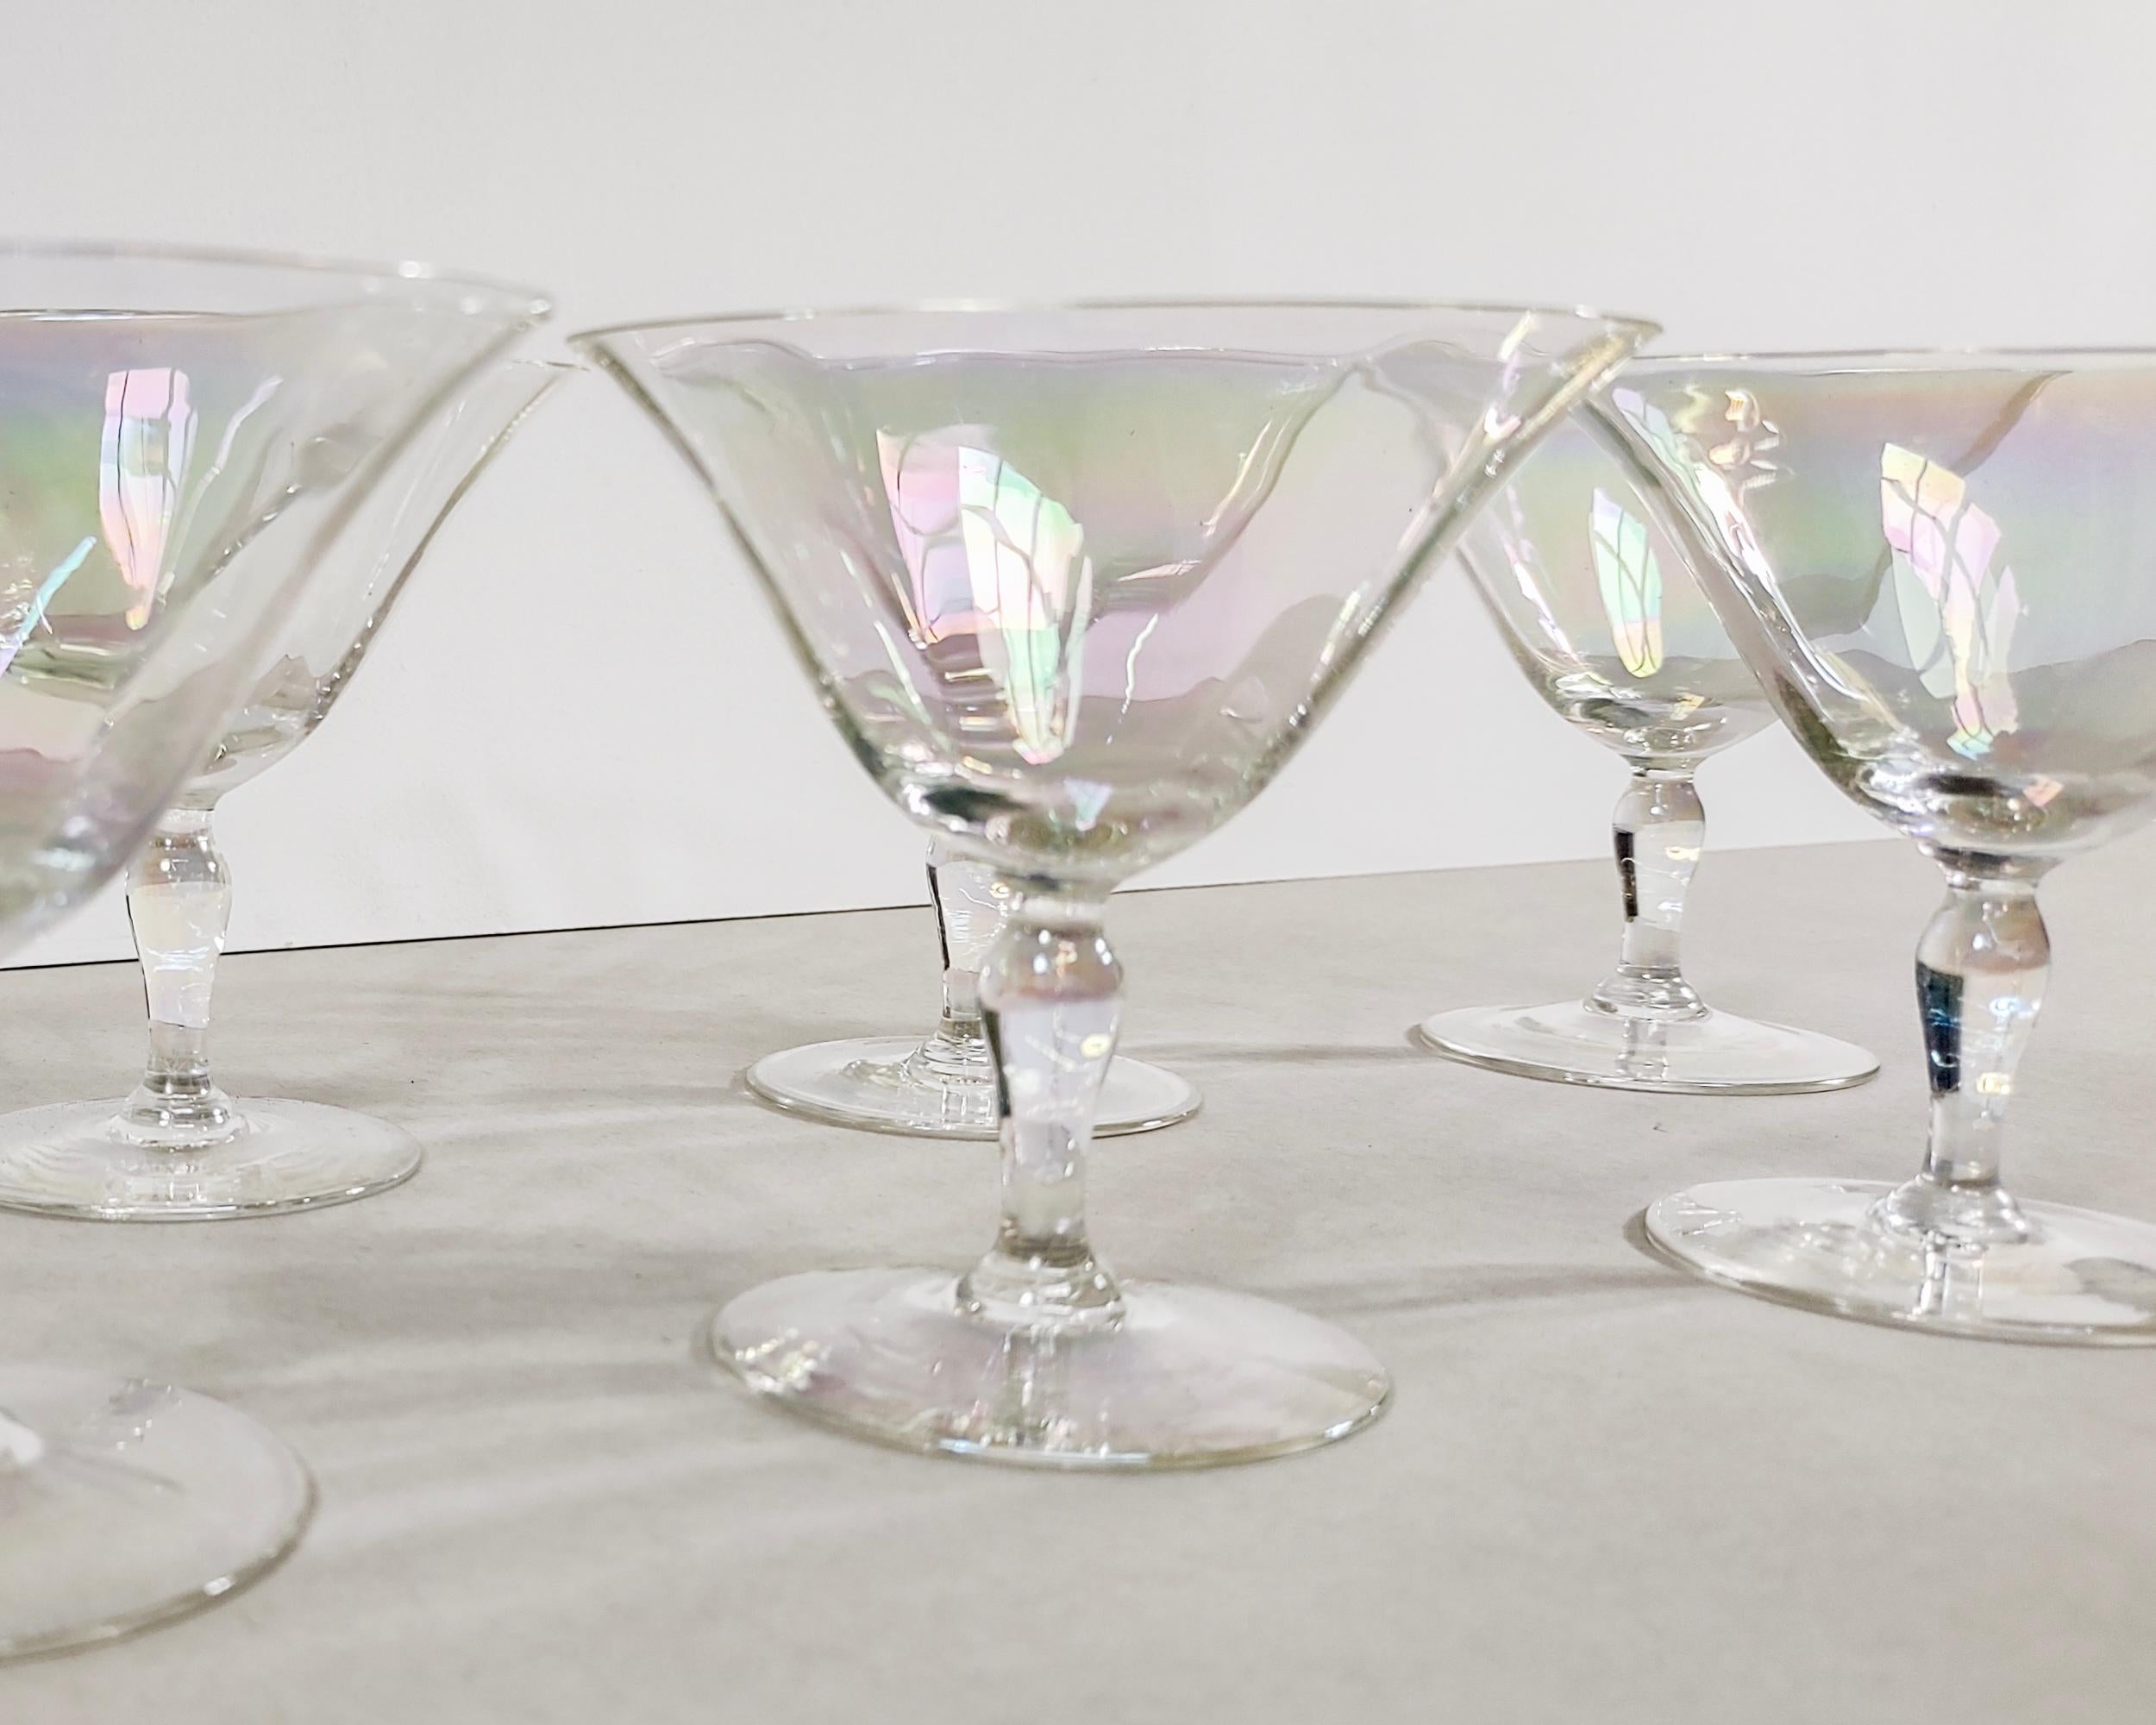 Set of six vintage 'Mother of Pearl' delicate iridescent tulip-shaped coupe champagne glasses by Fostoria circa 1930. Flared thin rims and hourglass shaped stems. Hand blown glass. Overall excellent condition, no chips or cracks.

4